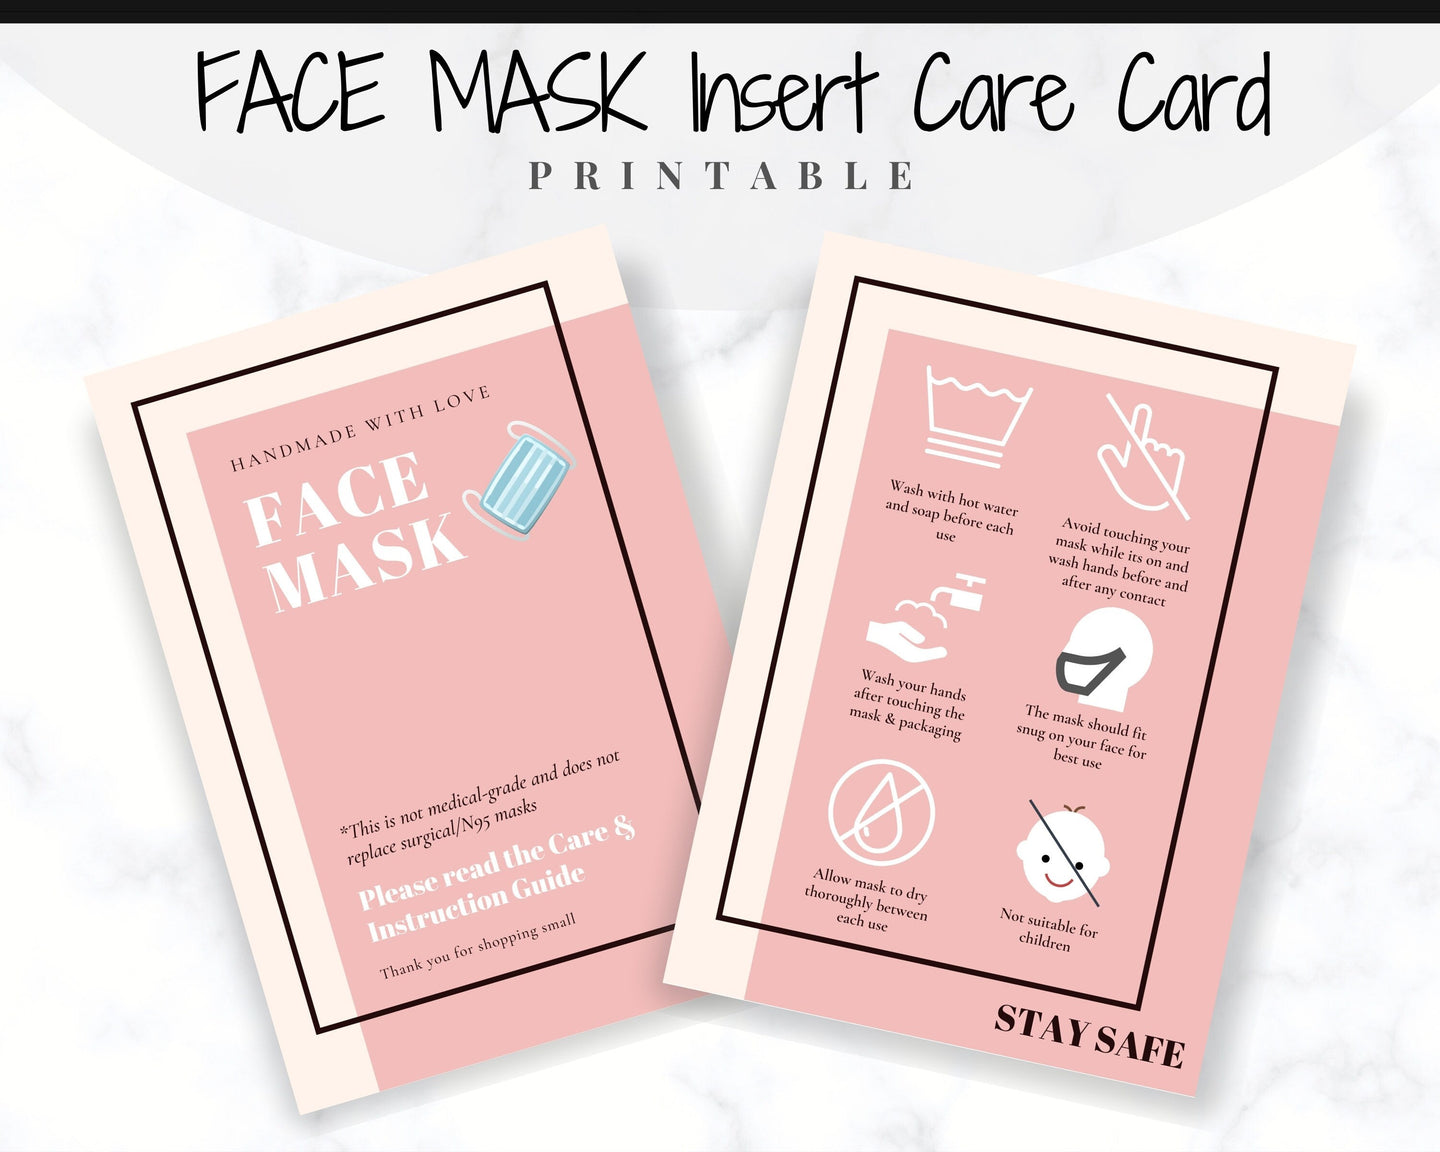 Face Mask LABEL CARE CARD, How to Handle Order Card, Face Mask Printable Instructions, Business Labels, Face Mask Seller, Package Label Tag | Pink & Monochrome Bundle